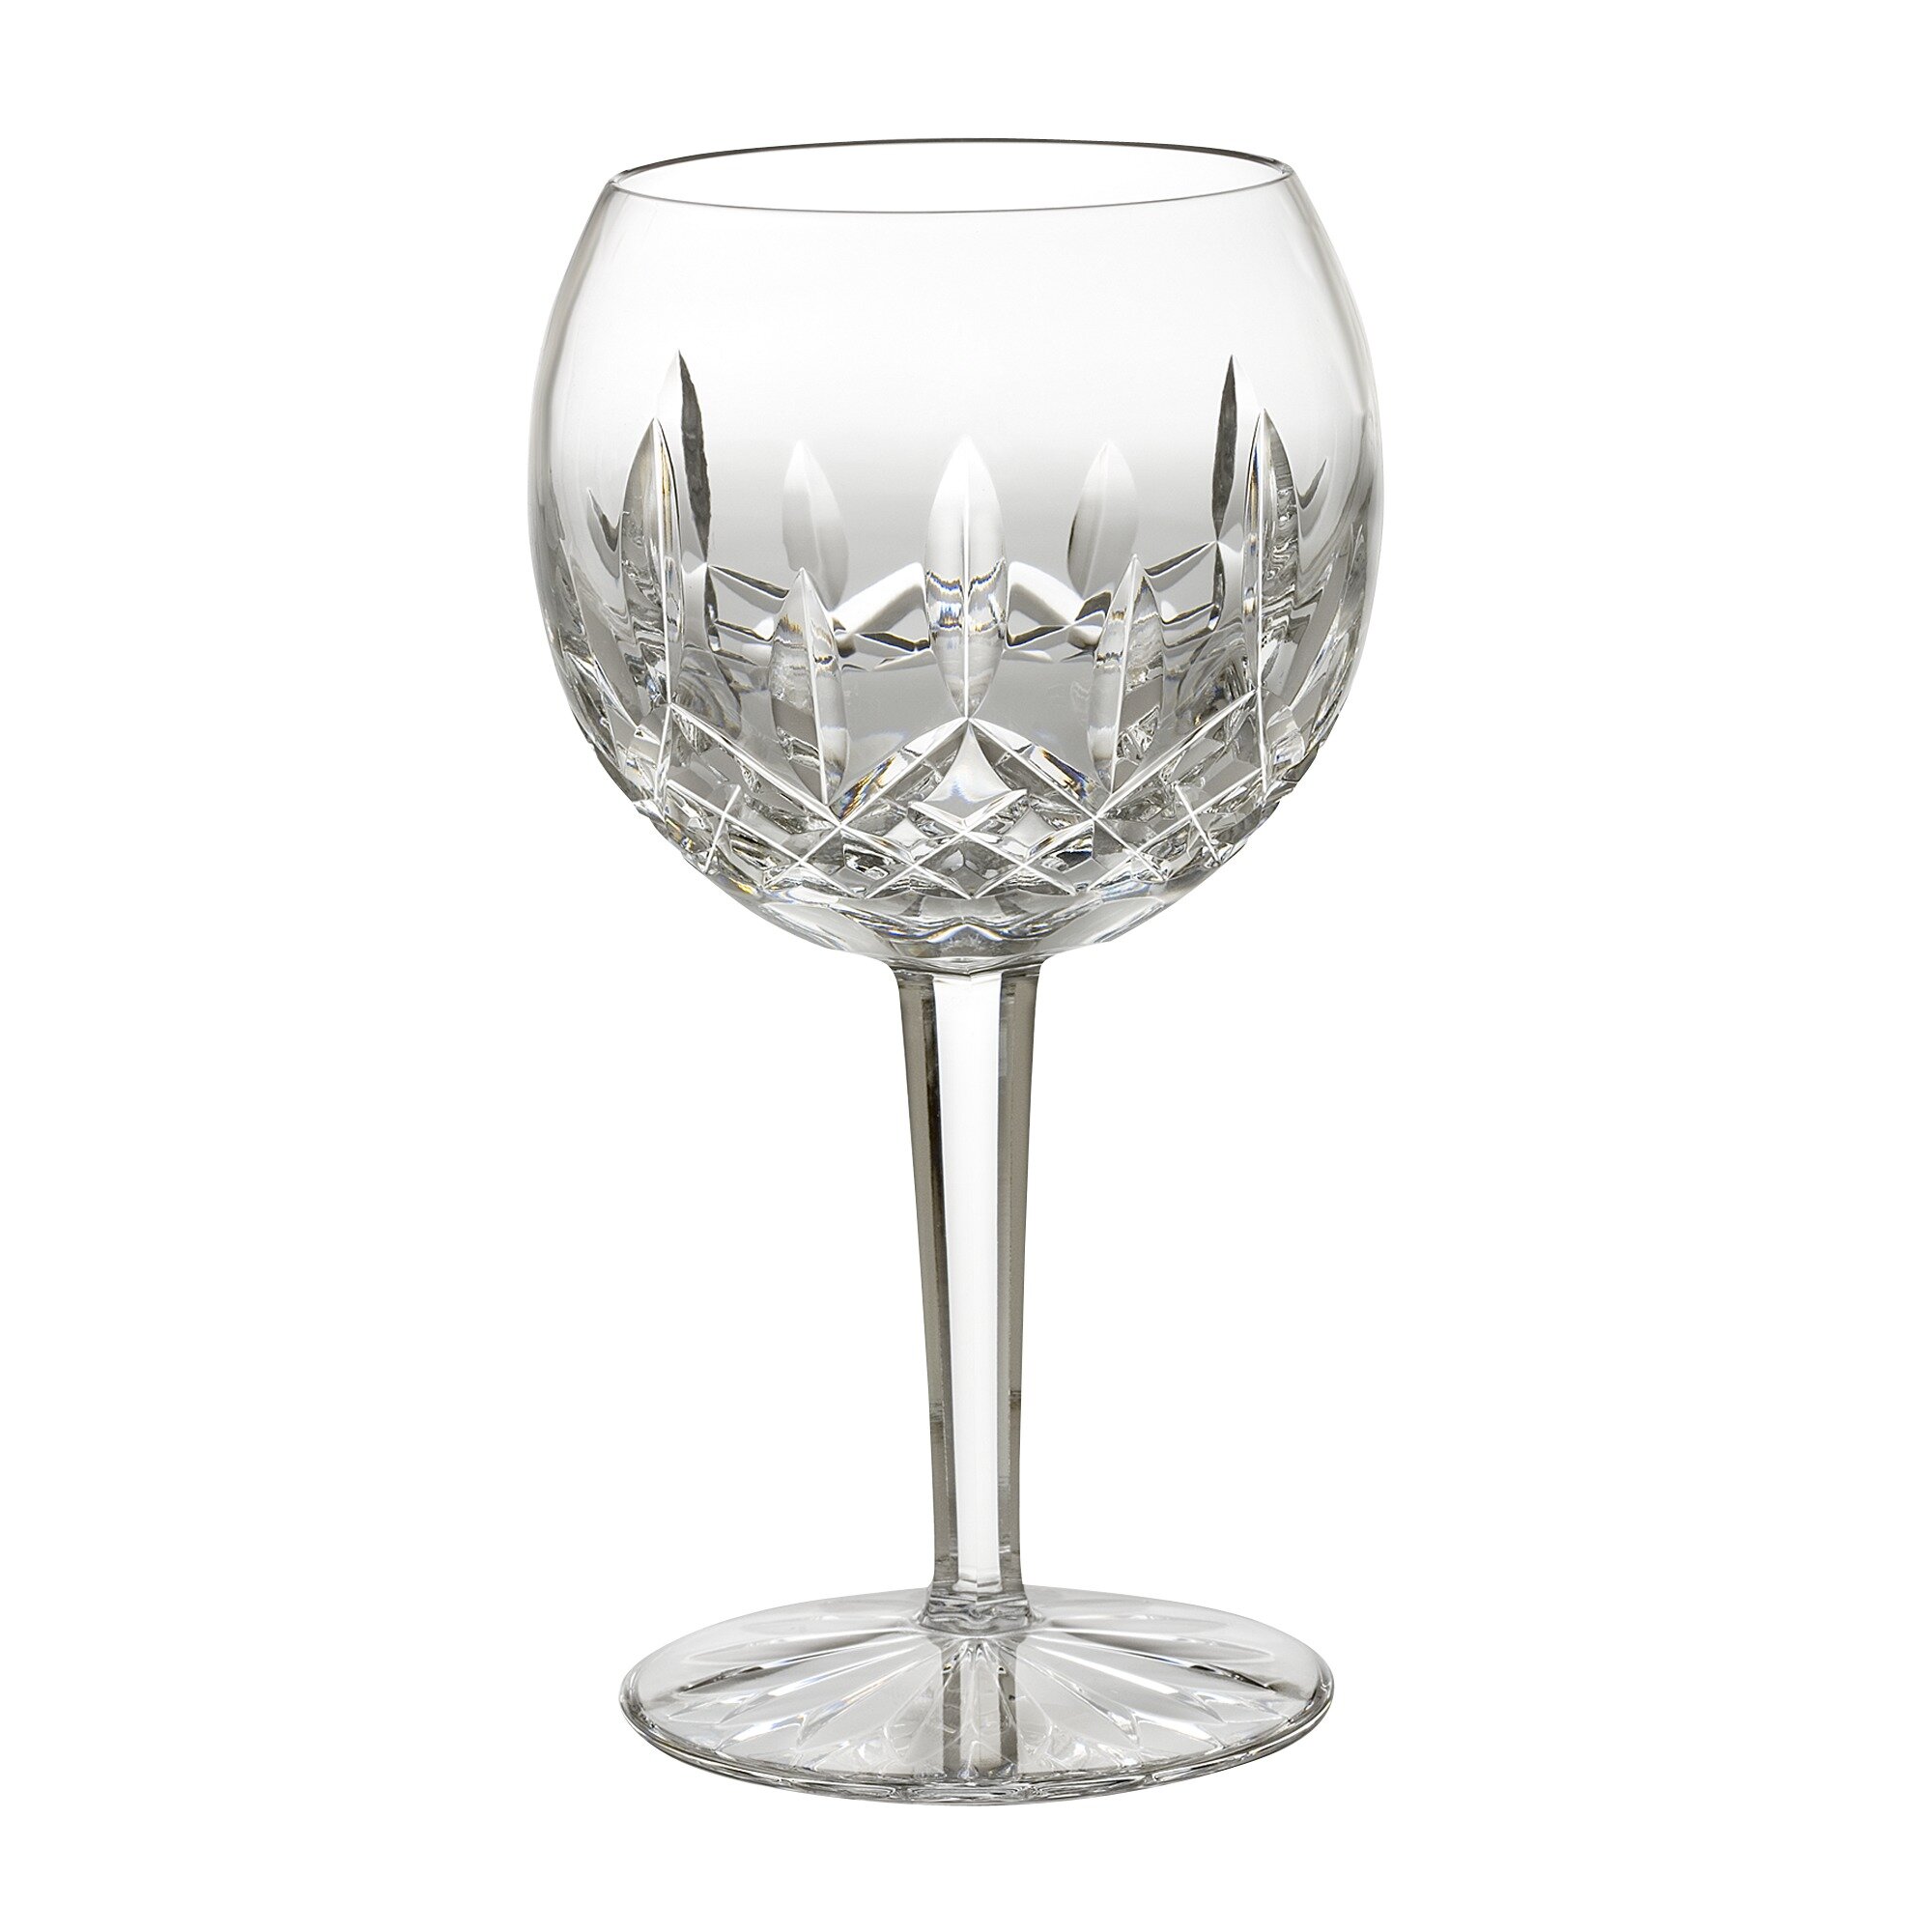 Waterford Lismore Balloon Wine Glass Set of 2